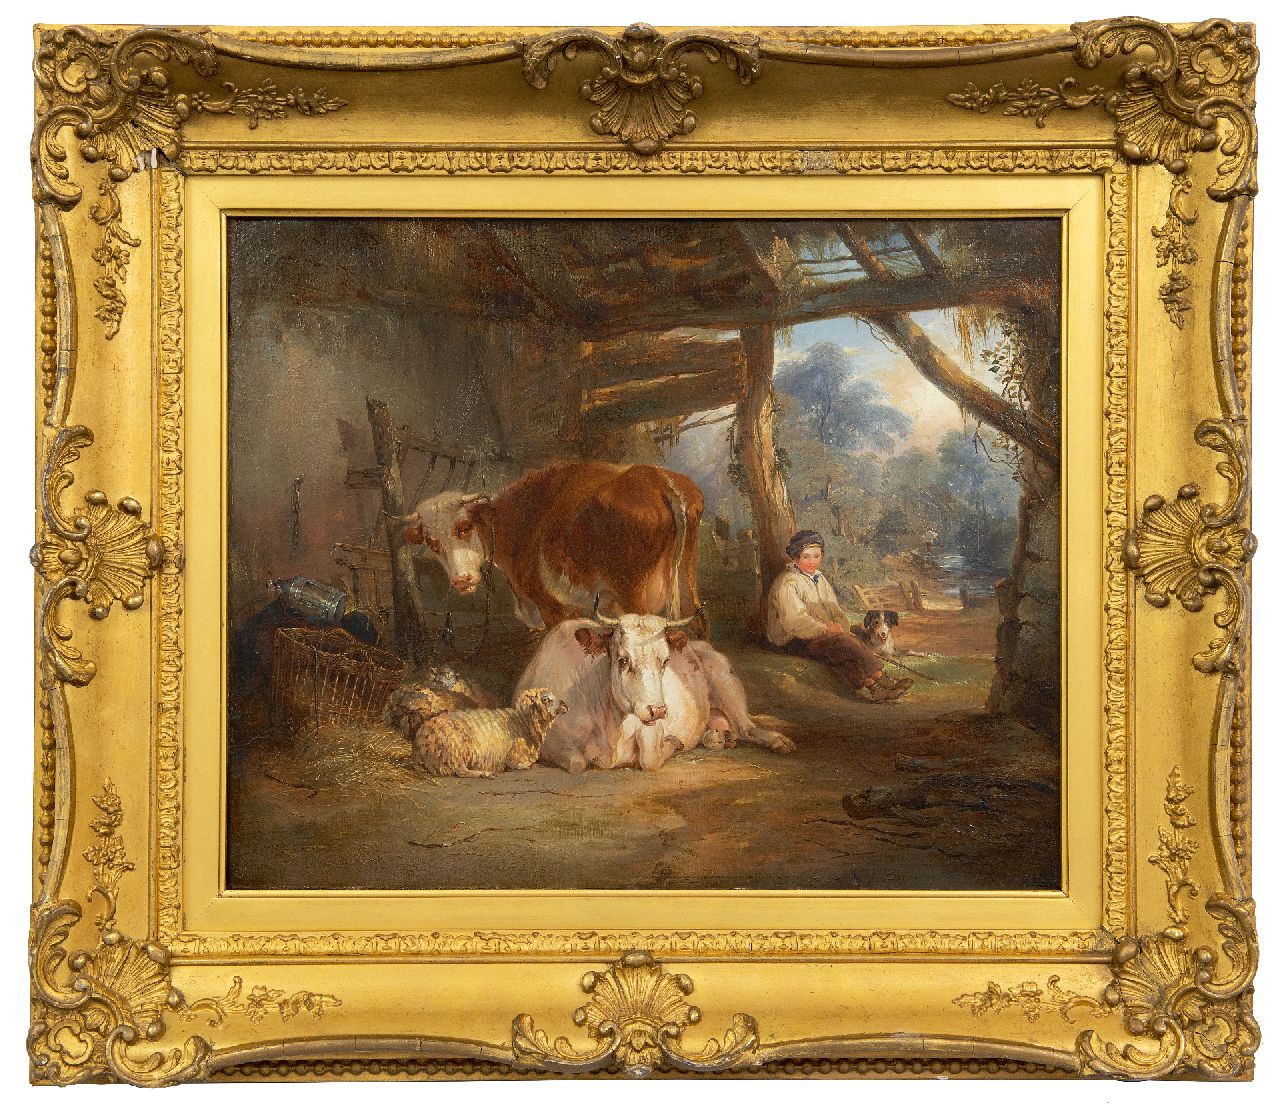 Engelse School, 19e eeuw   | Engelse School, 19e eeuw | Paintings offered for sale | A shepherd boy at rest in a stable, oil on canvas 35.8 x 44.3 cm